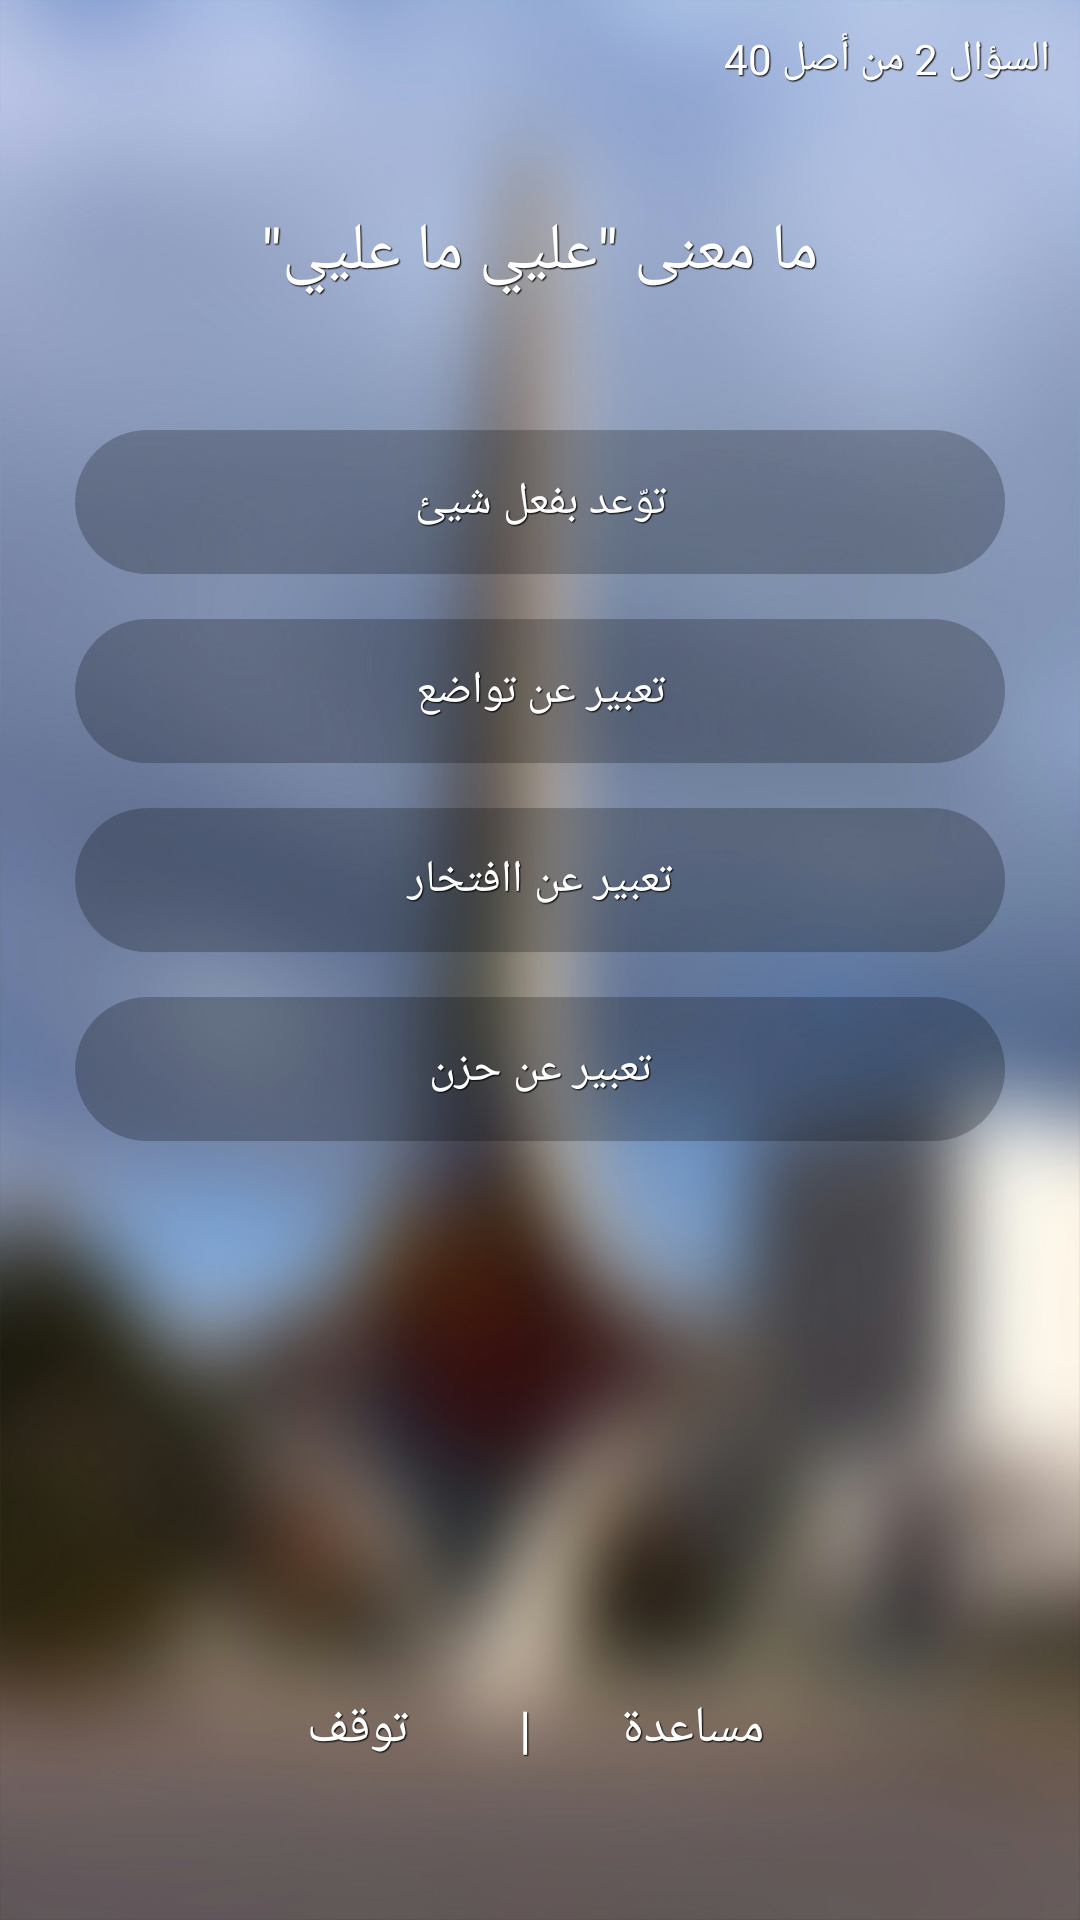 Android application Syrian Accents Test screenshort